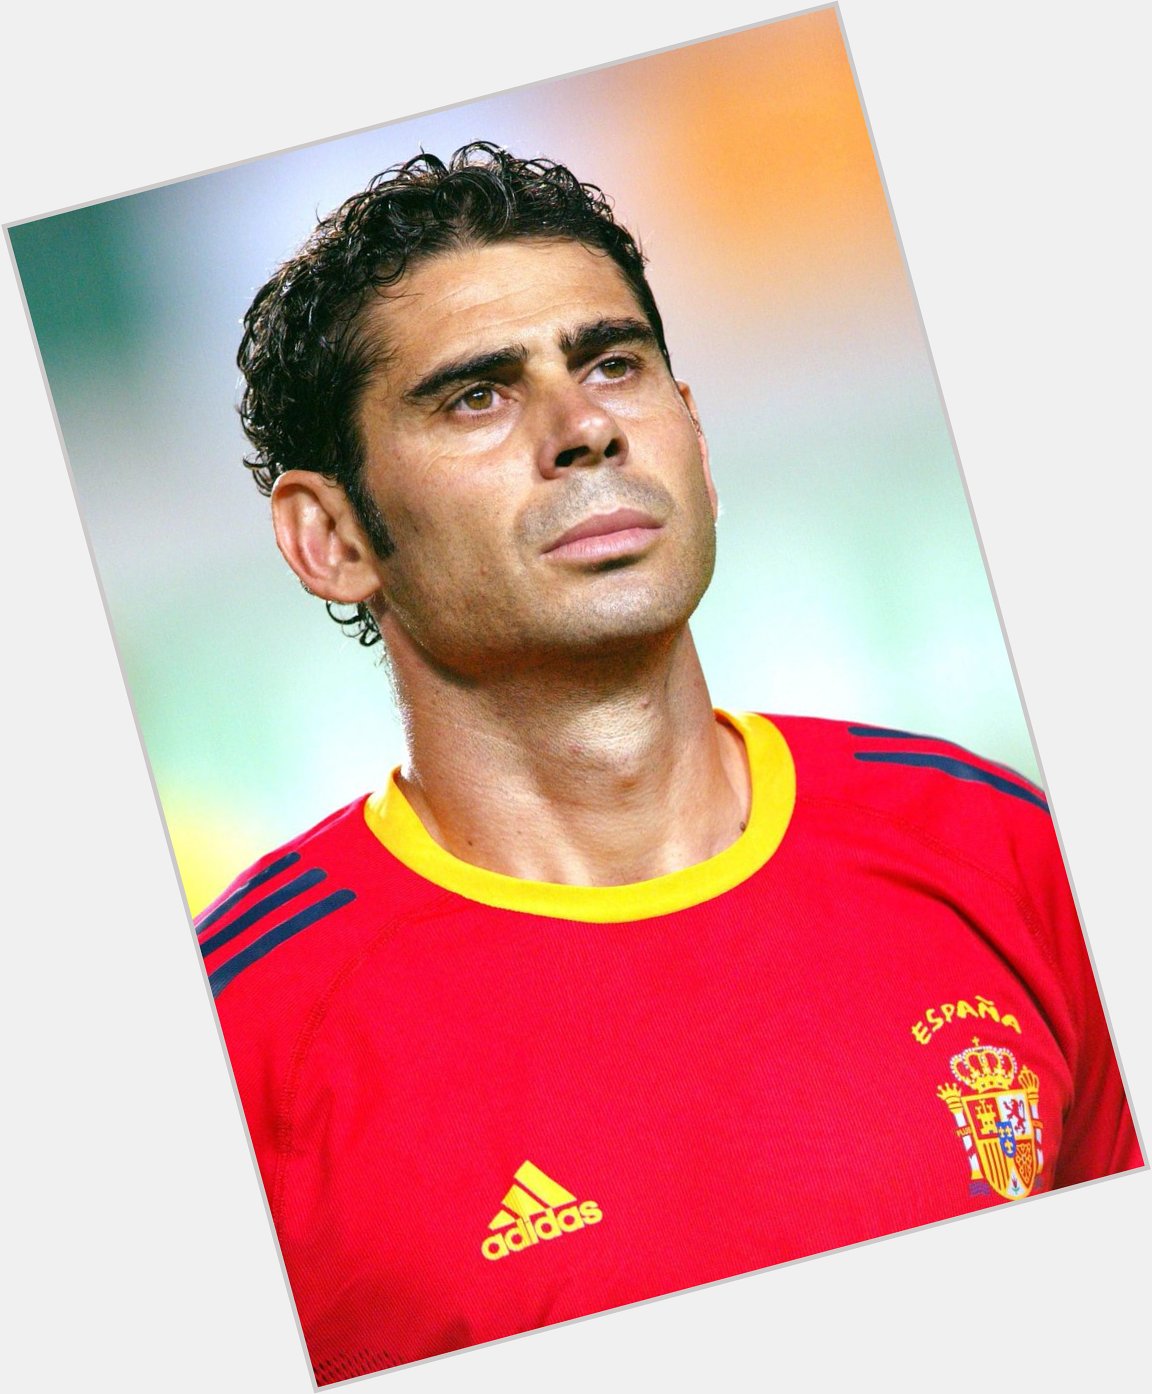 UEFAEURO: He won 89 caps for Spain, scored 29 goals & led by example...

Wish Fernando Hierro a happy birthday! 